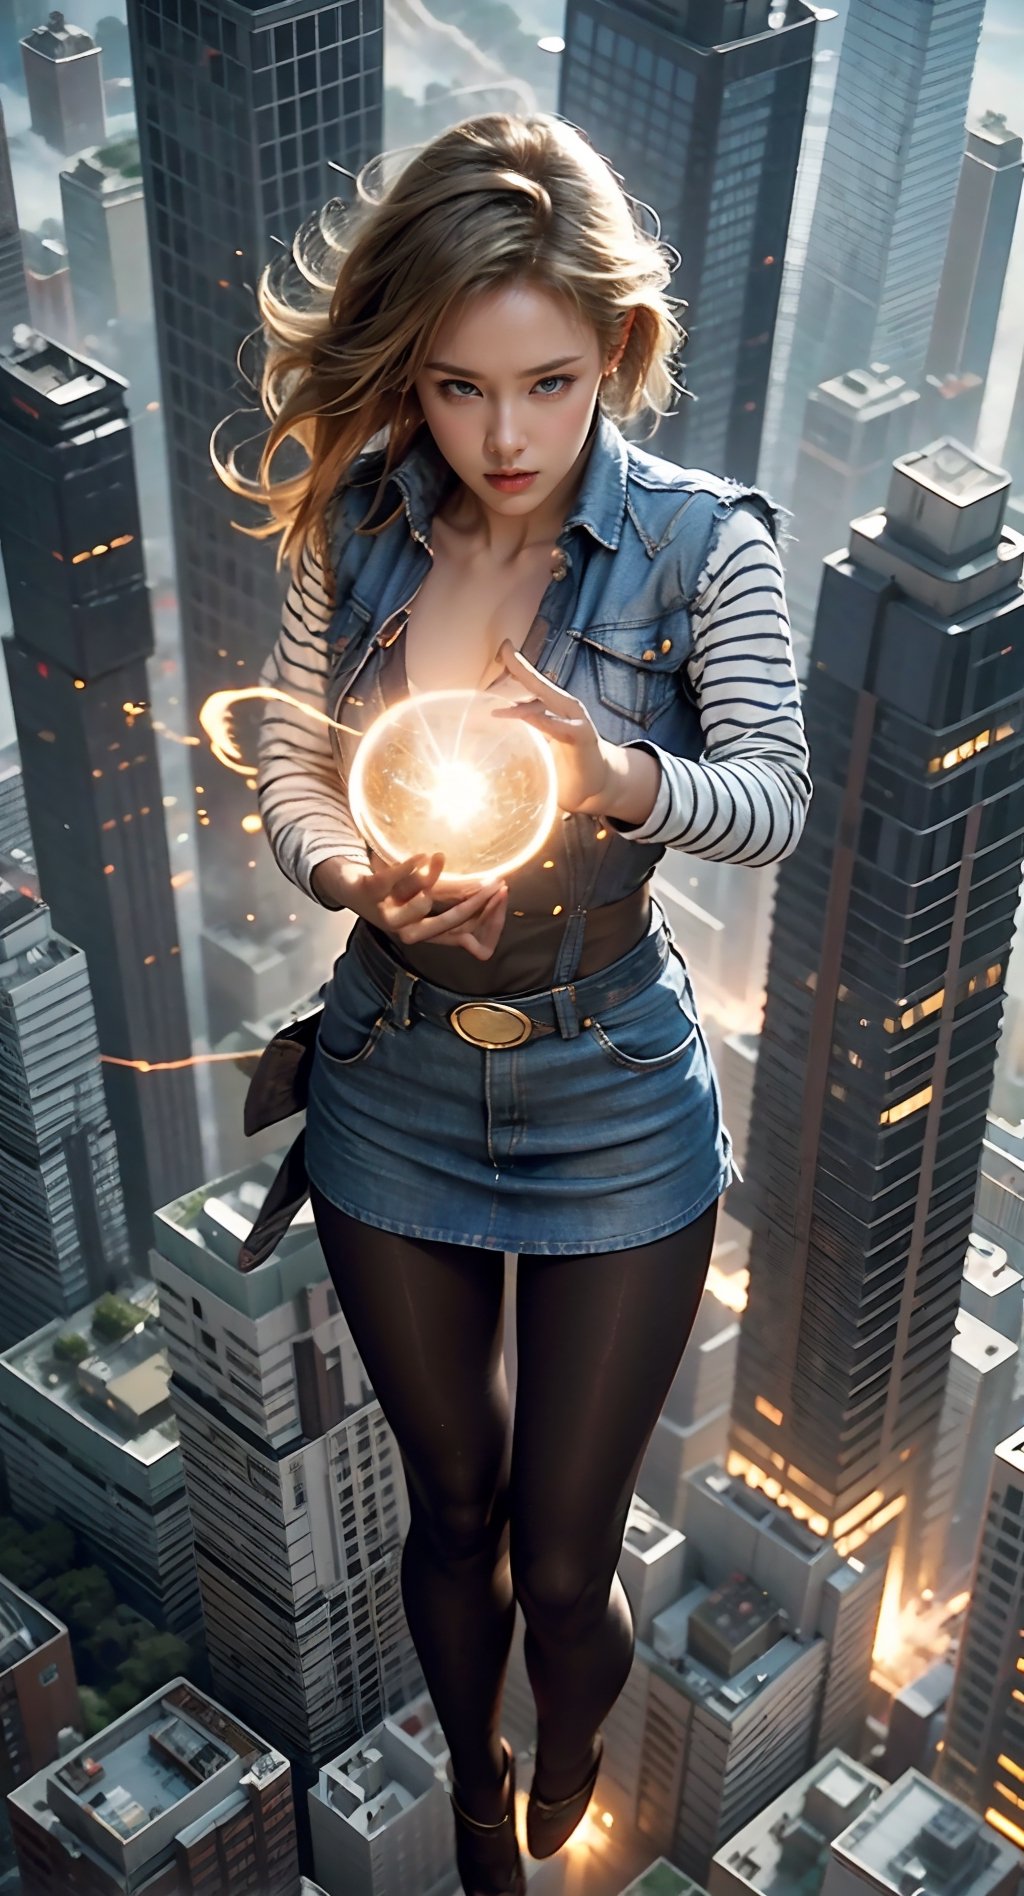 masterpiece, ultra realistic, 8K, Android_18_DB, full body, denim skirt, pantyhose, face focus, blond hair, look afar, top-down view,no gravity, she is weightlessness and flying through the buildings, cityscape,exploring,superwoman position, huge lighting balls in hands,thunder rings around the ball,，